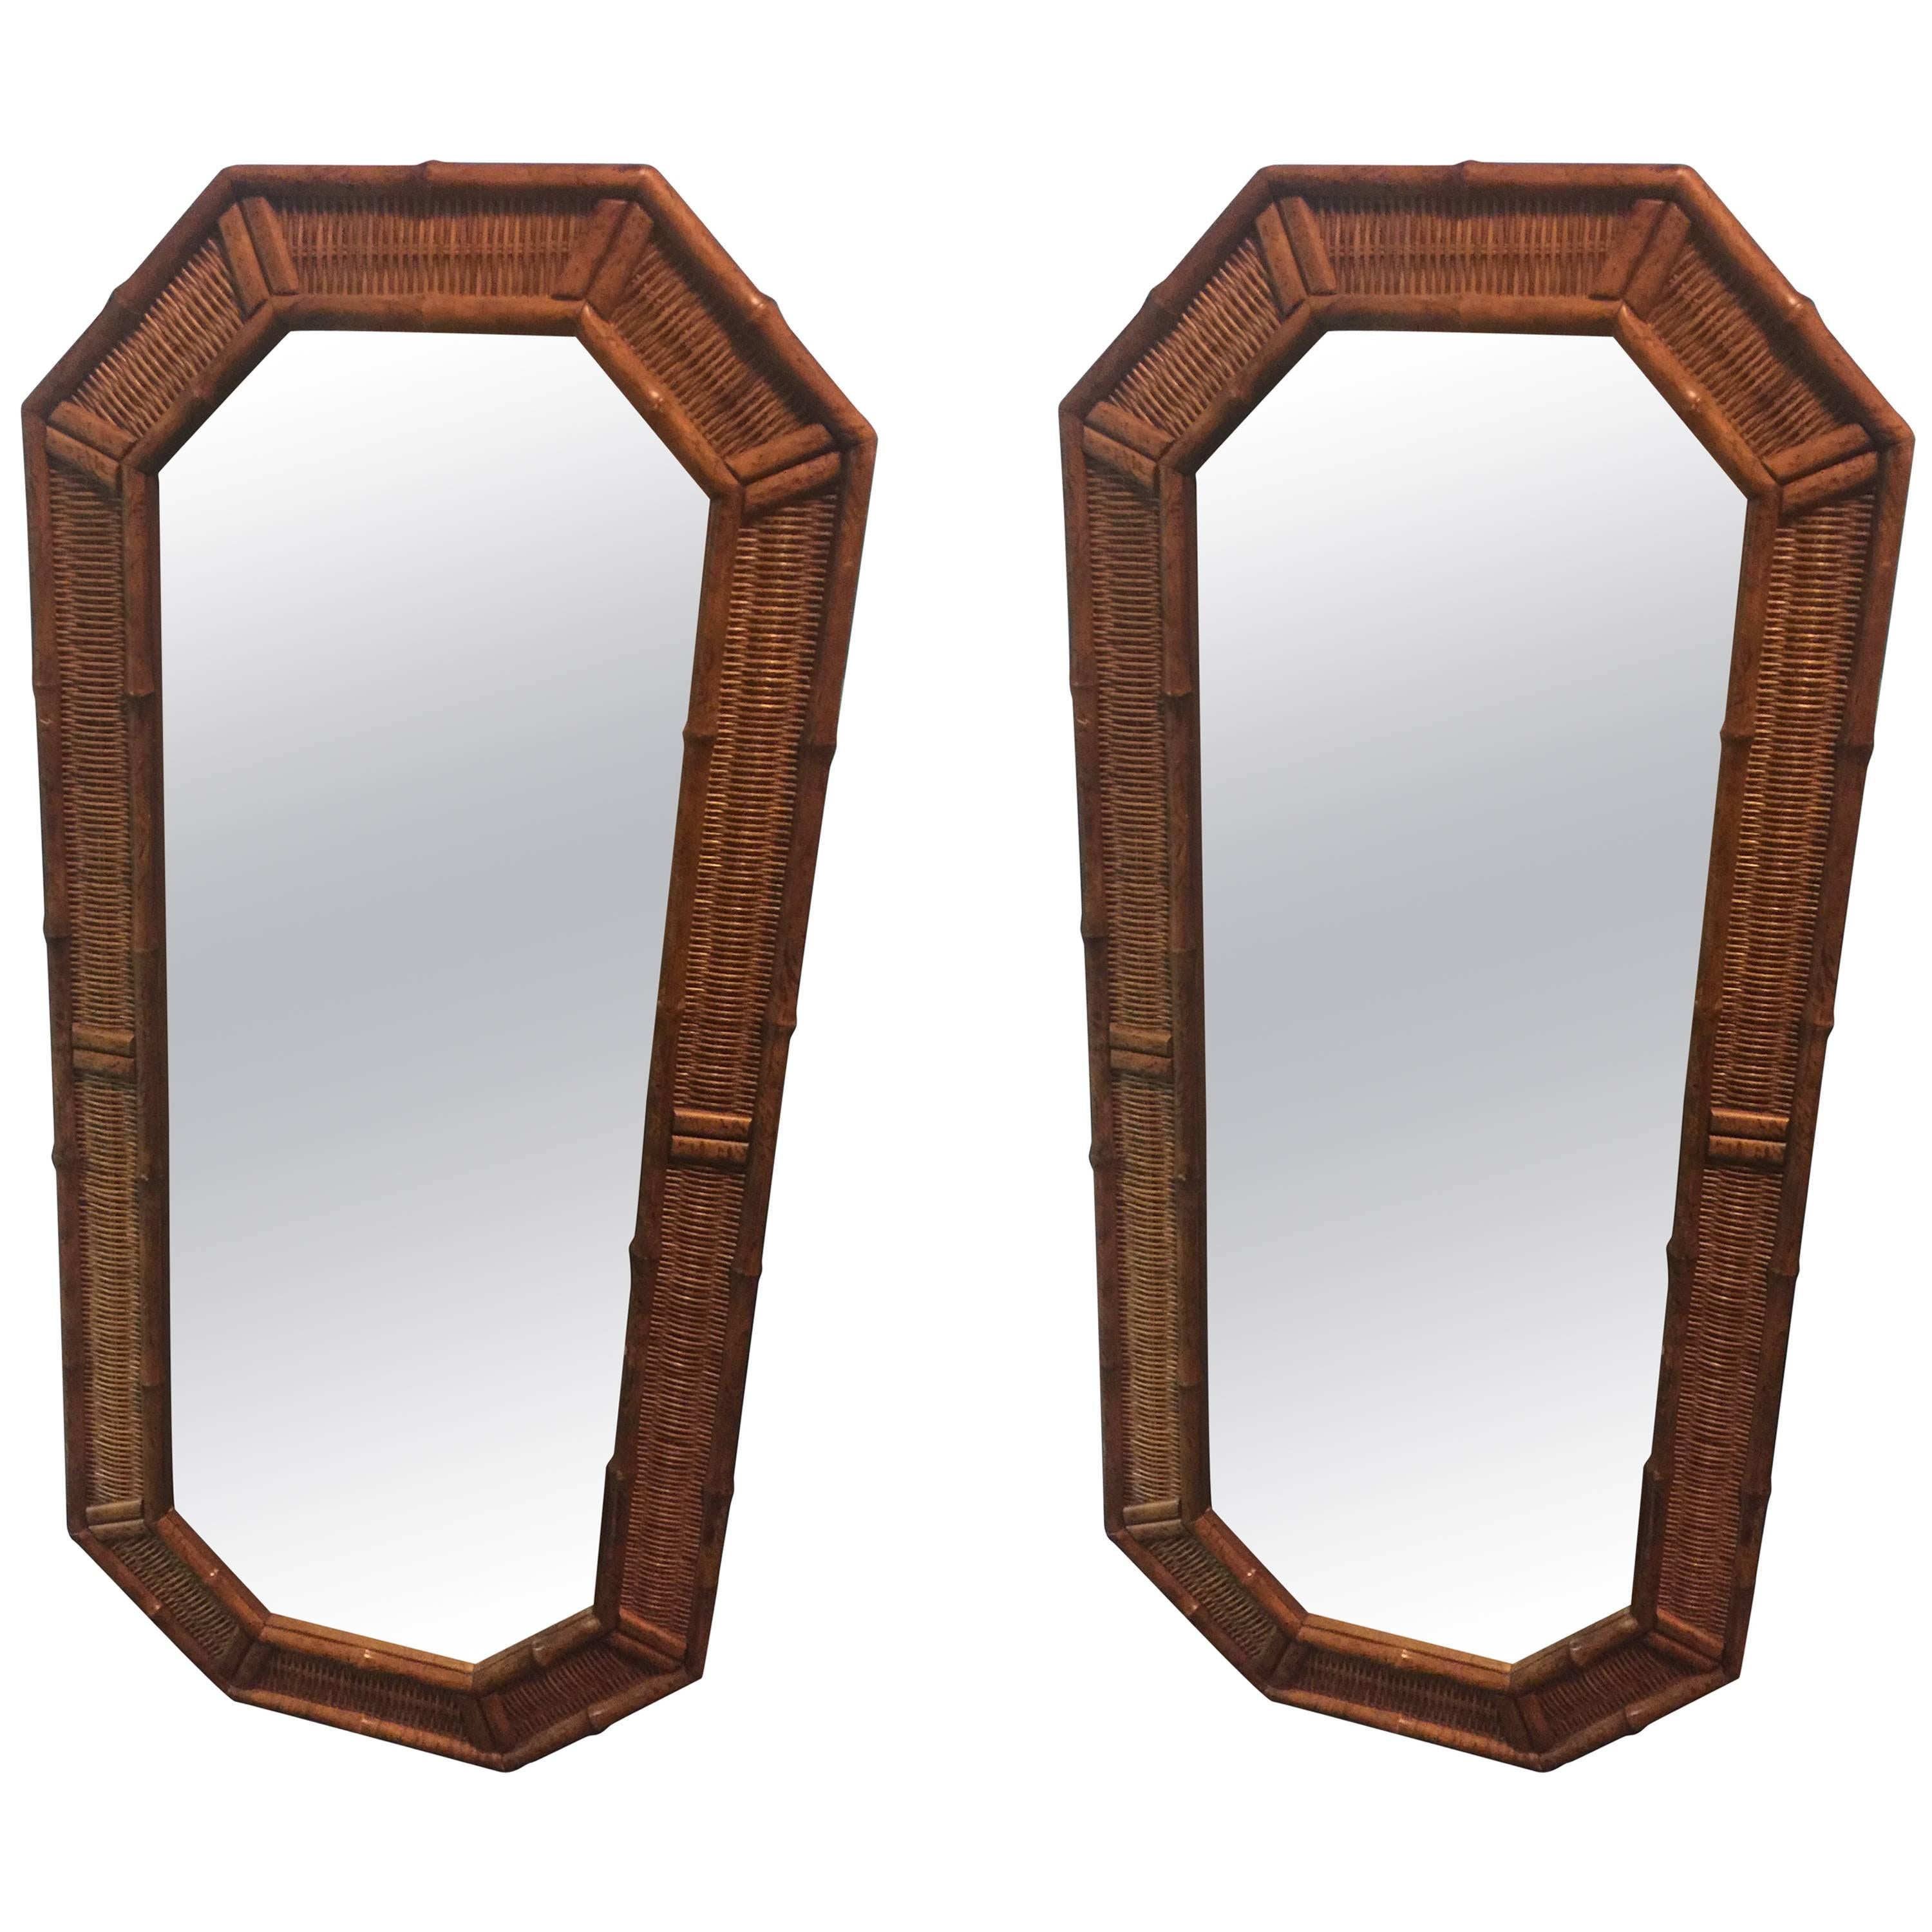 Pair of Modern Wood Bamboo and Wicker Octagonal Mirrors For Sale